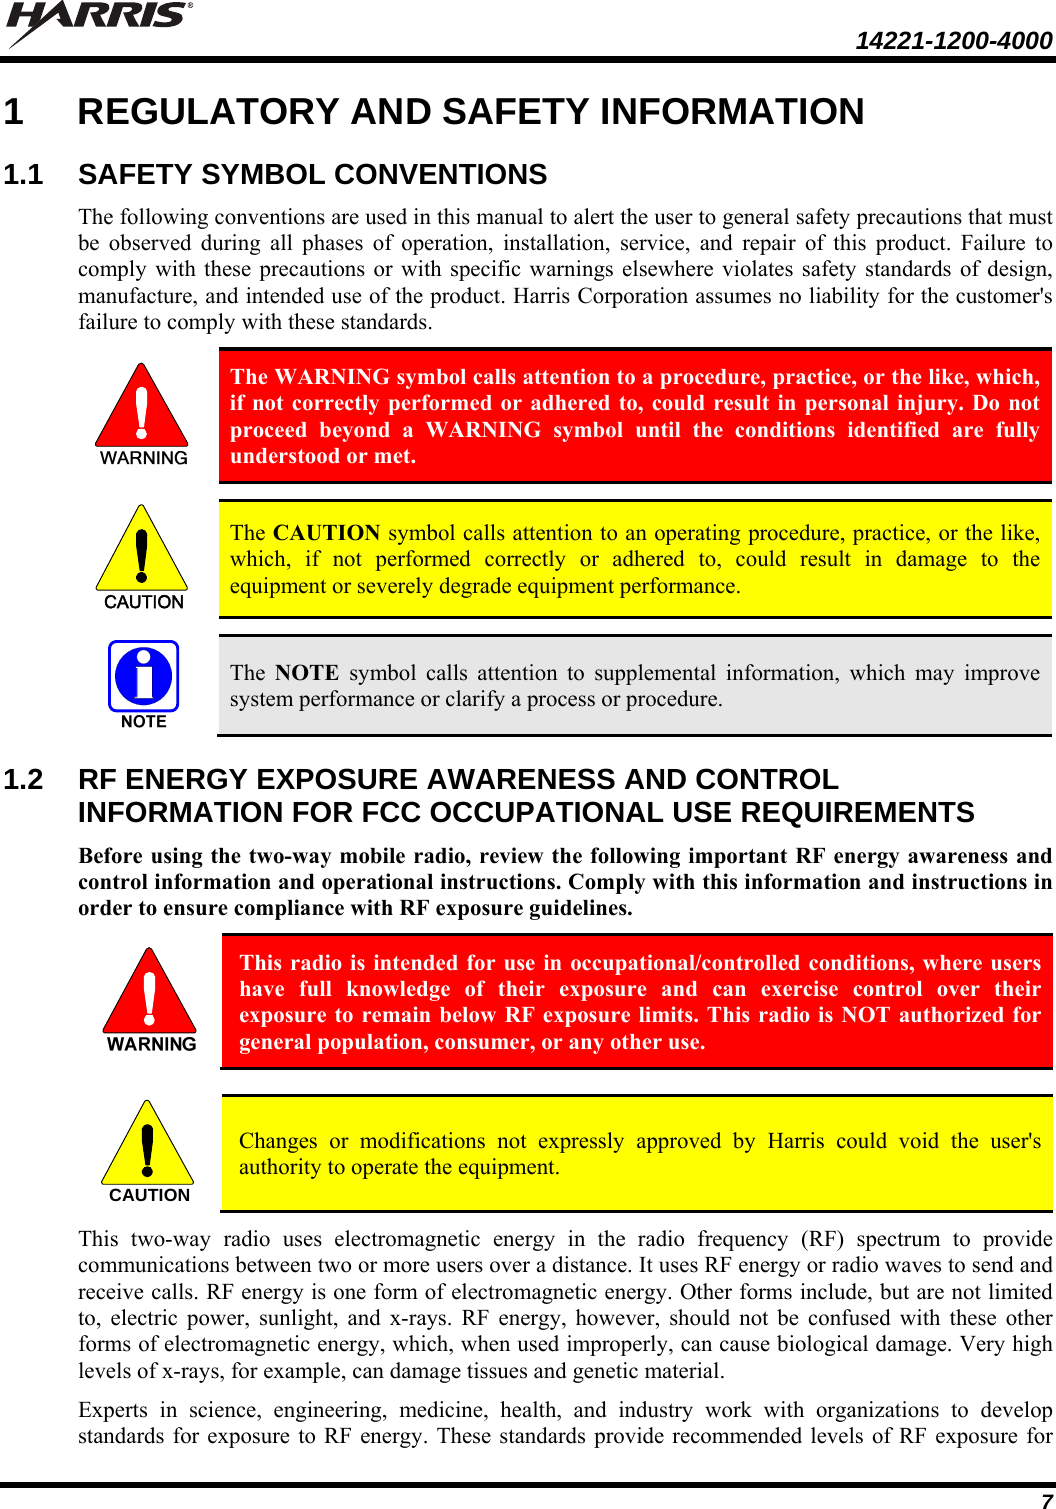  14221-1200-4000  7 1  REGULATORY AND SAFETY INFORMATION 1.1 SAFETY SYMBOL CONVENTIONS The following conventions are used in this manual to alert the user to general safety precautions that must be observed during all phases of operation, installation, service, and repair of this product. Failure to comply with these precautions or with specific warnings elsewhere violates safety standards of design, manufacture, and intended use of the product. Harris Corporation assumes no liability for the customer&apos;s failure to comply with these standards.  The WARNING symbol calls attention to a procedure, practice, or the like, which, if not correctly performed or adhered to, could result in personal injury. Do not proceed beyond a WARNING symbol until the conditions identified are fully understood or met.   CAUTION  The CAUTION symbol calls attention to an operating procedure, practice, or the like, which, if not performed correctly or adhered to, could result in damage to the equipment or severely degrade equipment performance.    The  NOTE symbol calls attention to supplemental information, which may improve system performance or clarify a process or procedure. 1.2  RF ENERGY EXPOSURE AWARENESS AND CONTROL INFORMATION FOR FCC OCCUPATIONAL USE REQUIREMENTS Before using the two-way mobile radio, review the following important RF energy awareness and control information and operational instructions. Comply with this information and instructions in order to ensure compliance with RF exposure guidelines.  This radio is intended for use in occupational/controlled conditions, where users have full knowledge of their exposure and can exercise control over their exposure to remain below RF exposure limits. This radio is NOT authorized for general population, consumer, or any other use.   Changes or modifications not expressly approved by Harris could void the user&apos;s authority to operate the equipment. This two-way radio uses electromagnetic energy in the radio frequency (RF) spectrum to provide communications between two or more users over a distance. It uses RF energy or radio waves to send and receive calls. RF energy is one form of electromagnetic energy. Other forms include, but are not limited to, electric power, sunlight, and x-rays. RF energy, however, should not be confused with these other forms of electromagnetic energy, which, when used improperly, can cause biological damage. Very high levels of x-rays, for example, can damage tissues and genetic material. Experts in science, engineering, medicine, health, and industry work with organizations to develop standards for exposure to RF energy. These standards provide recommended levels of RF exposure for CAUTION